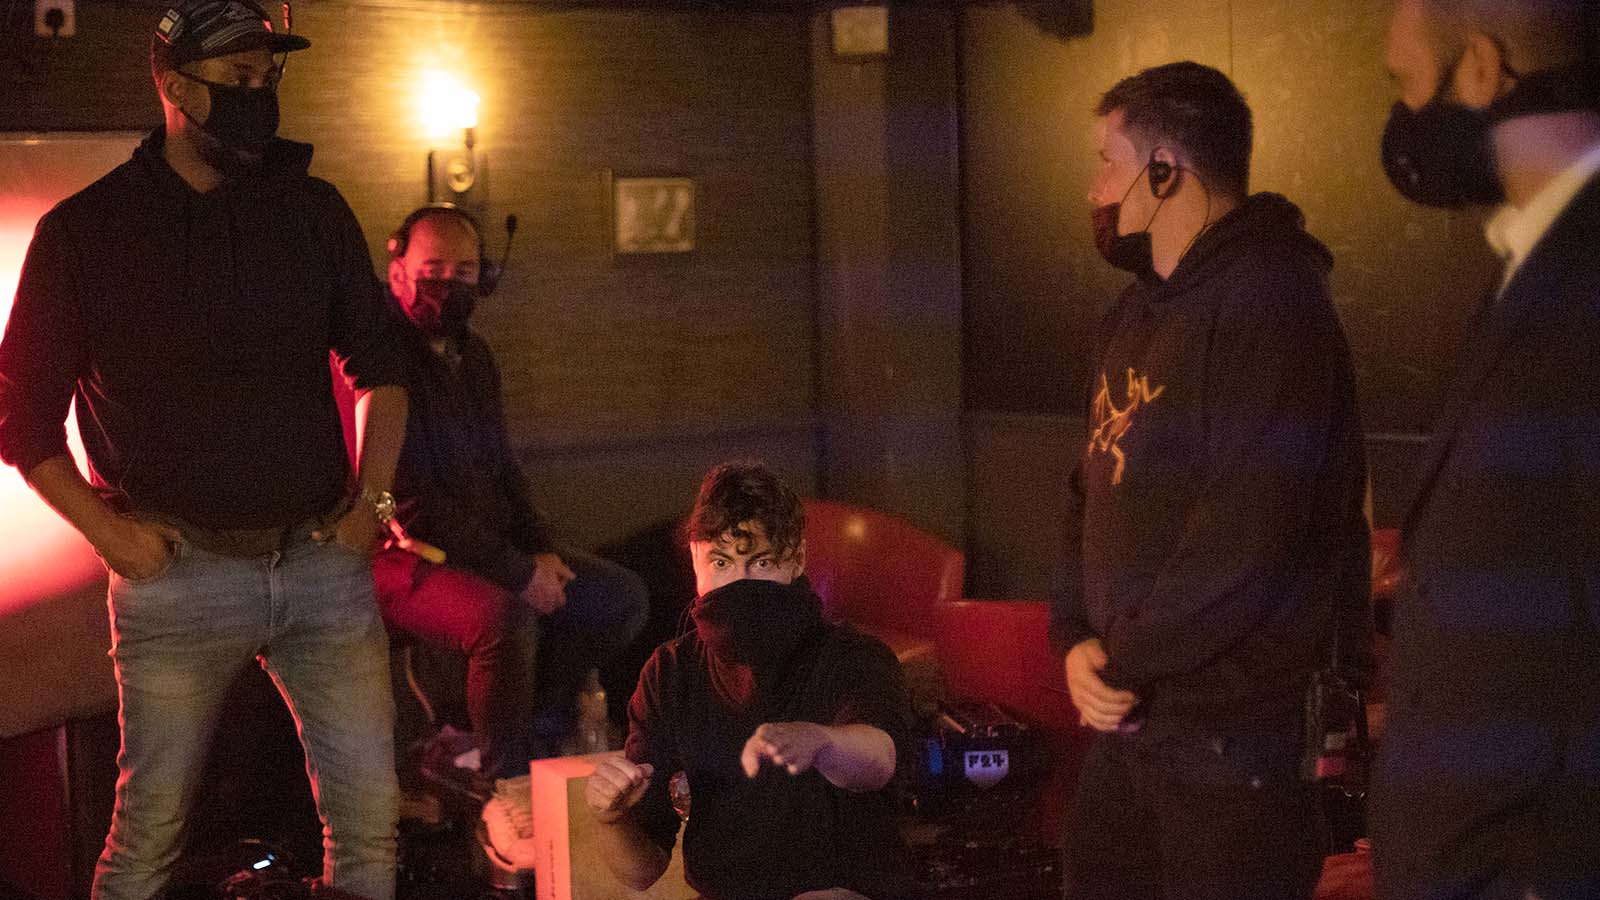 Co-founders Jack Attridge (center) and Pavle Mihajlovic (center-right) directing on the set for Hush.